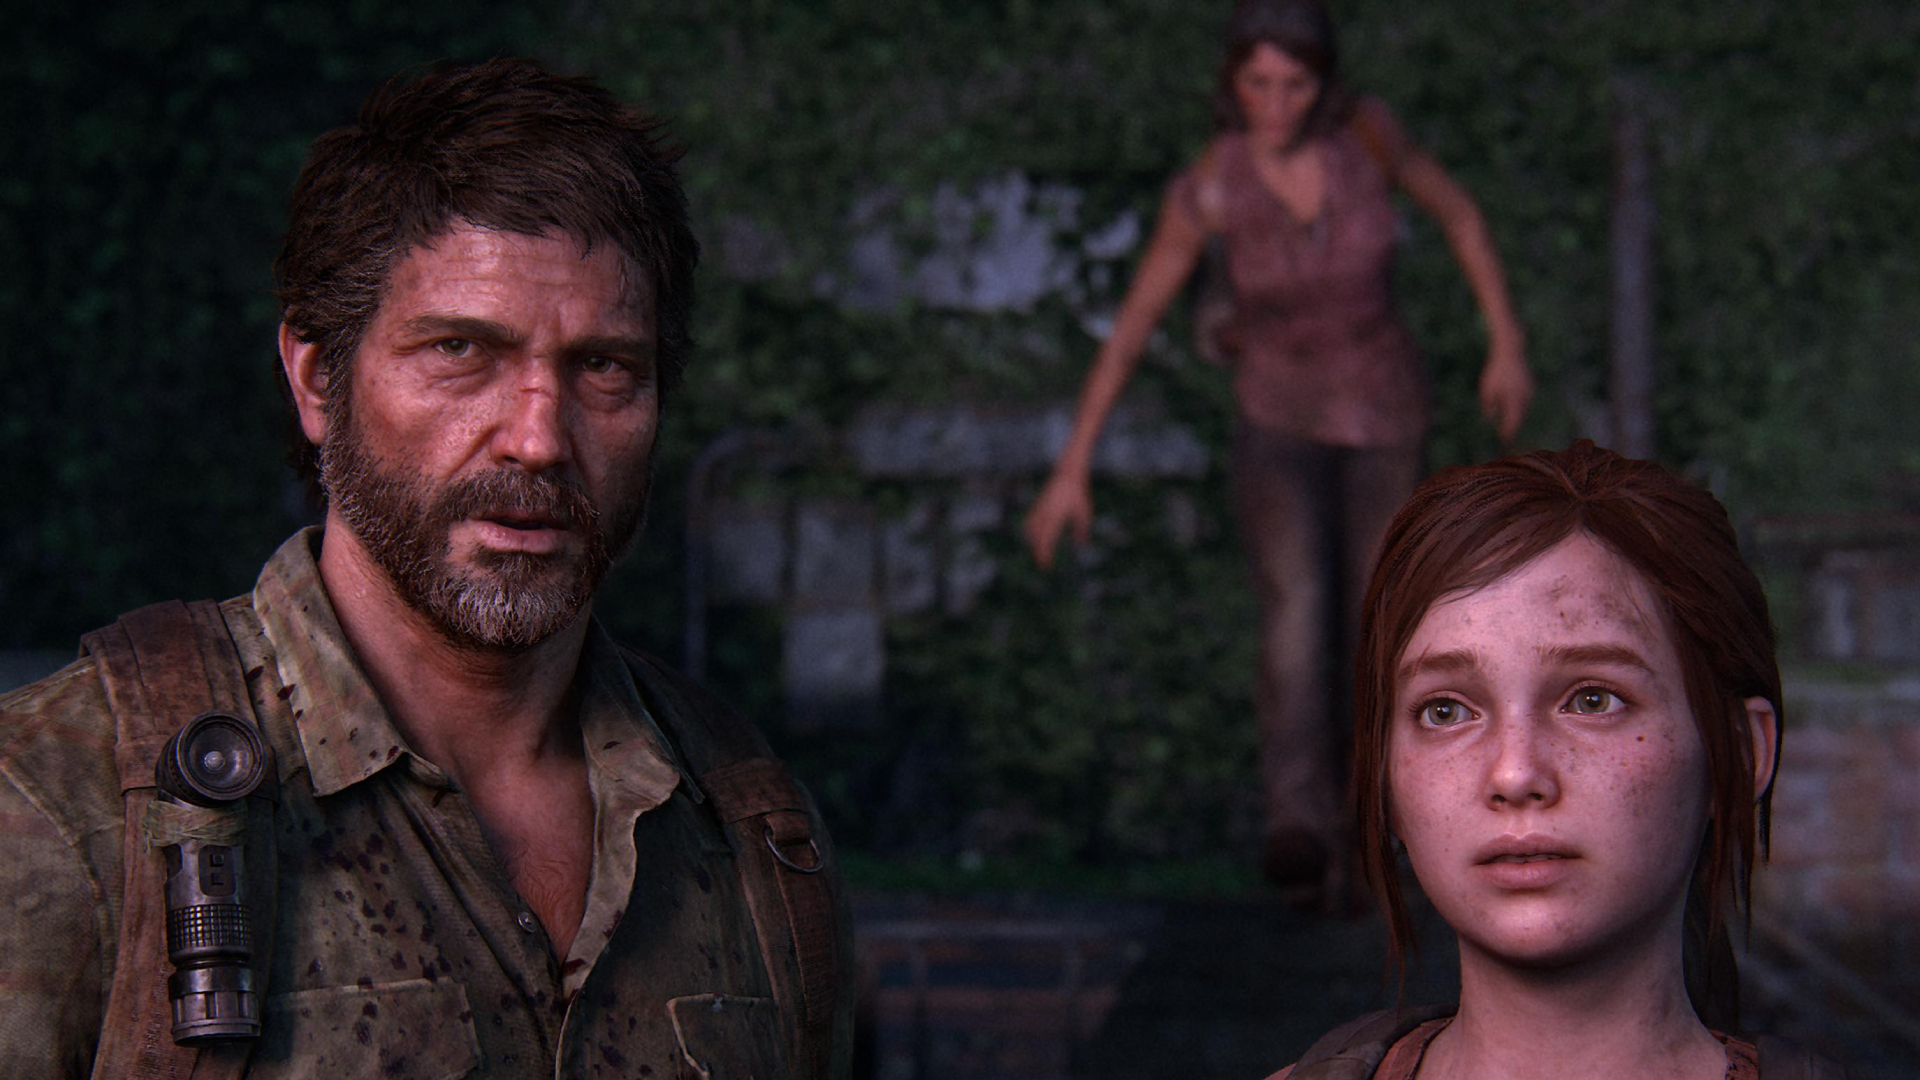 The Last of Us Part 1 finally gets Steam Deck verified